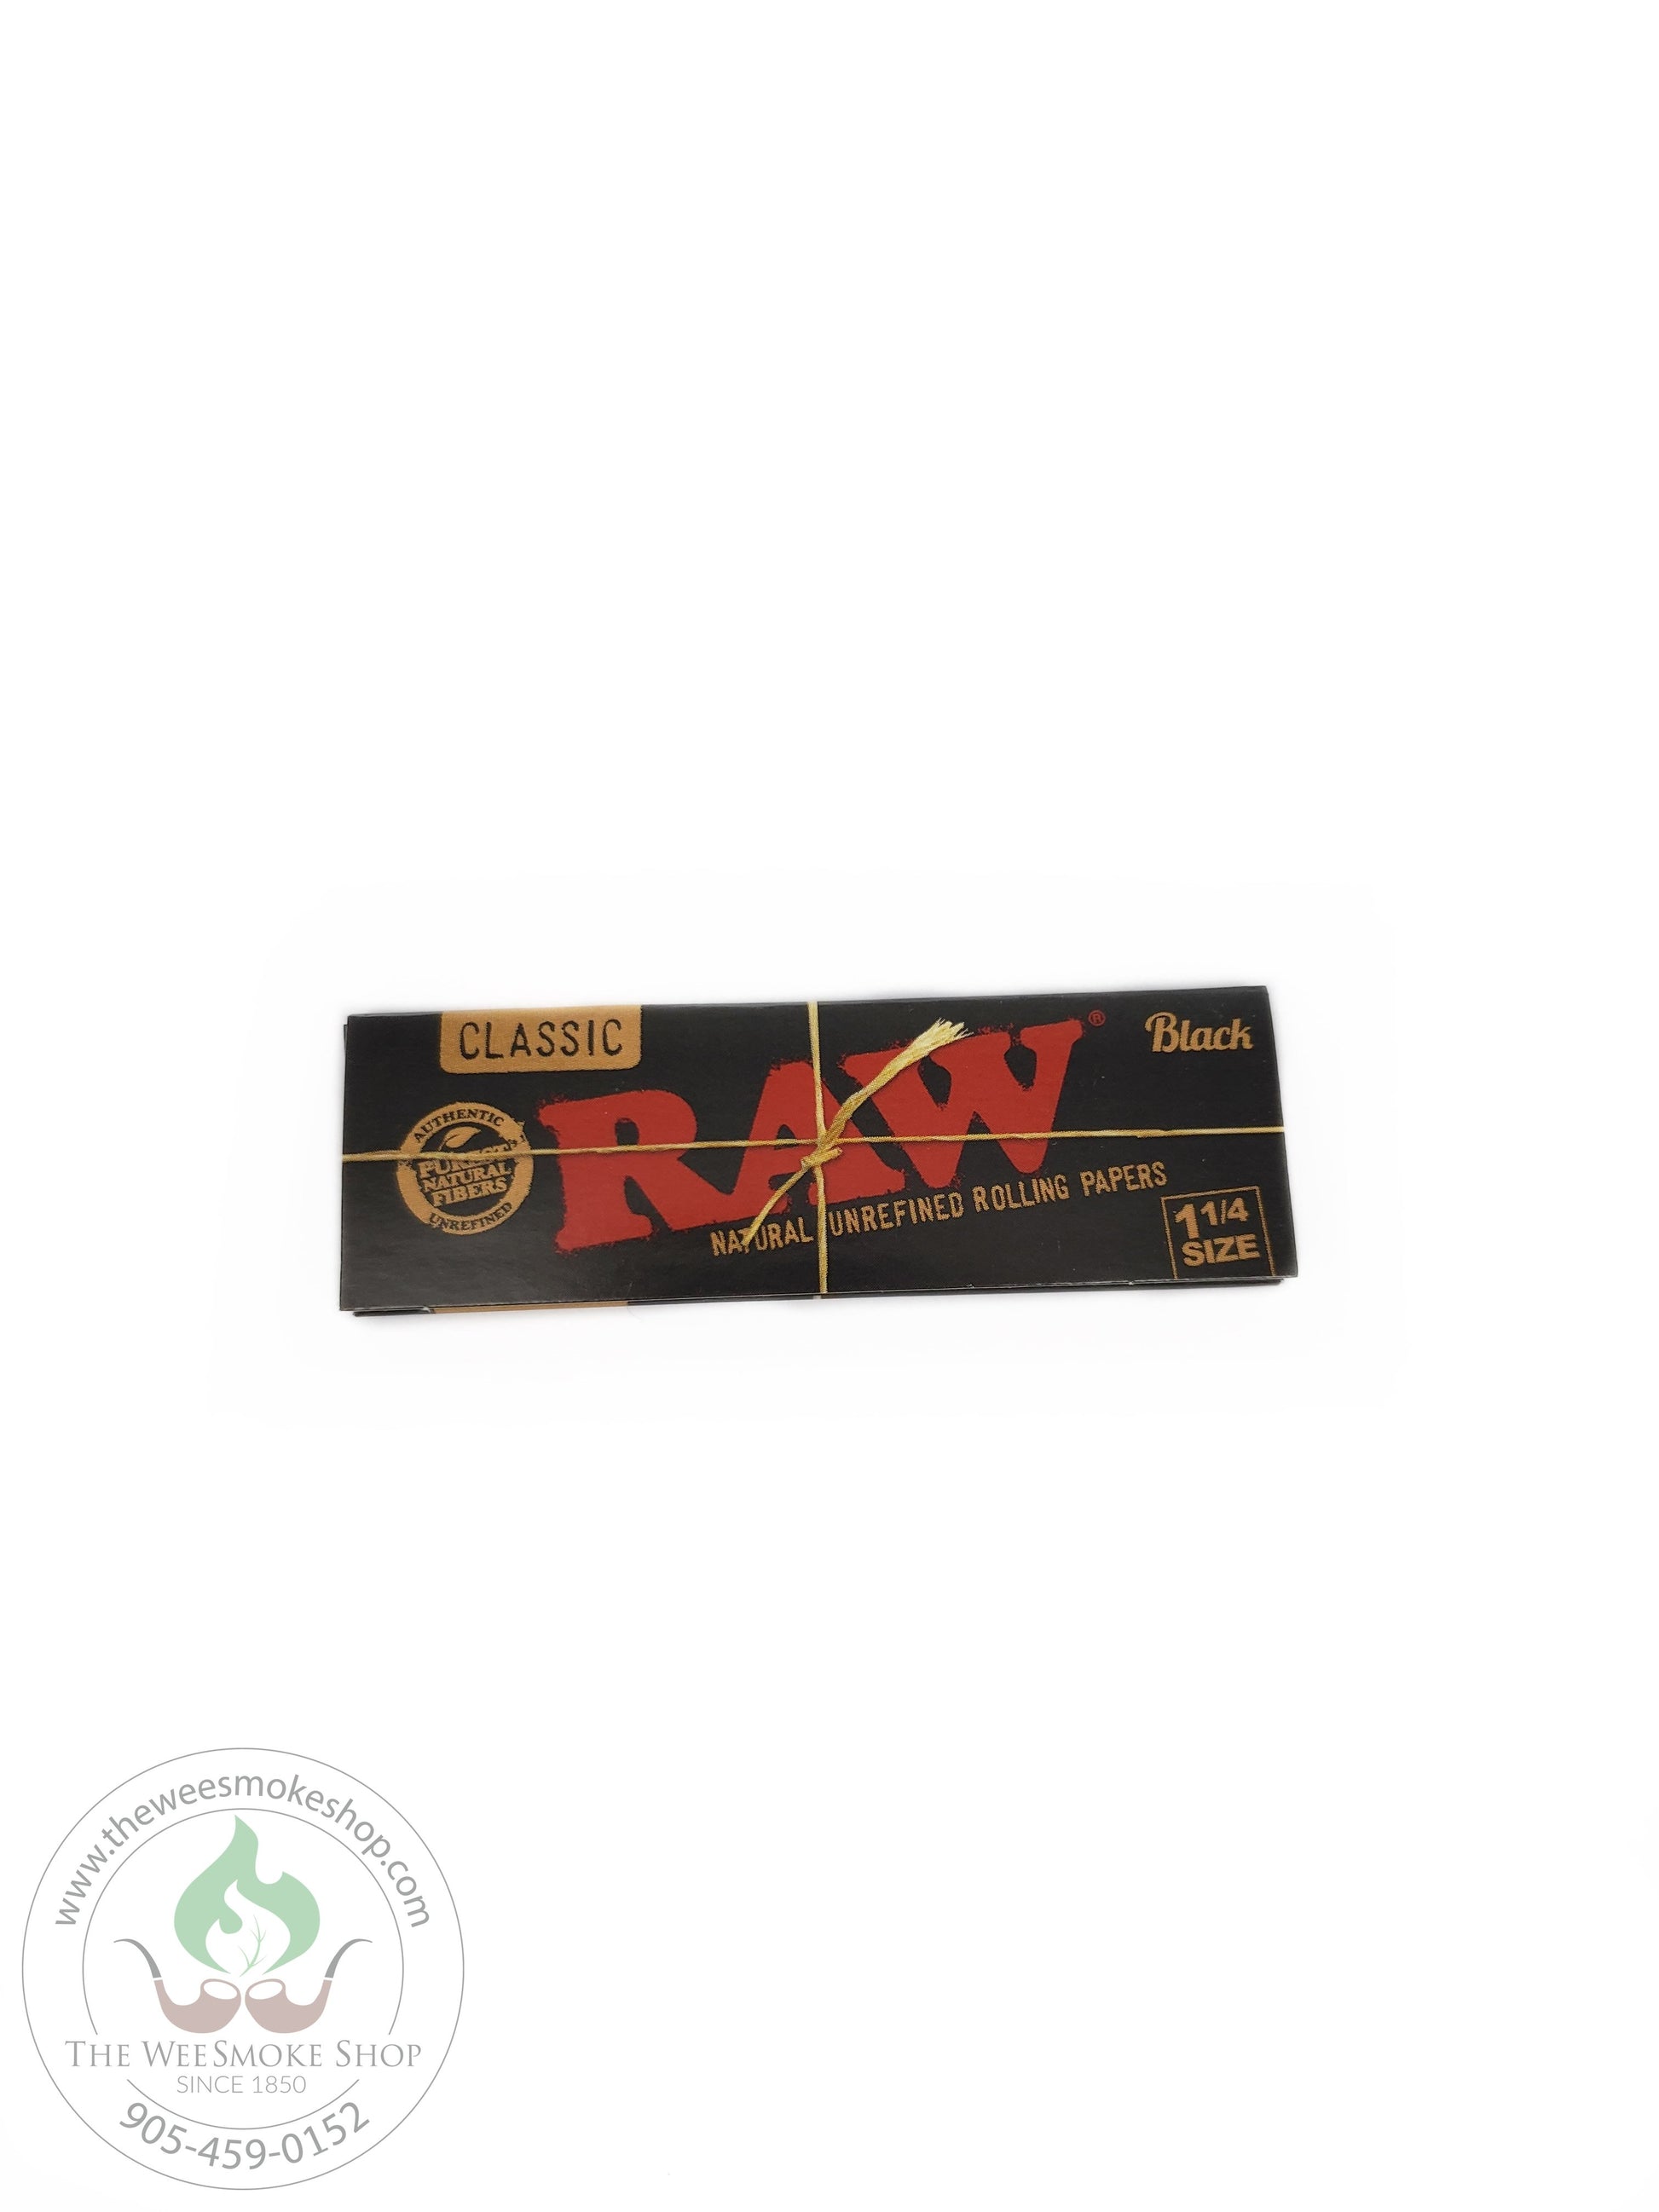 RAW Black Rolling Papers. 1 1/4 size.